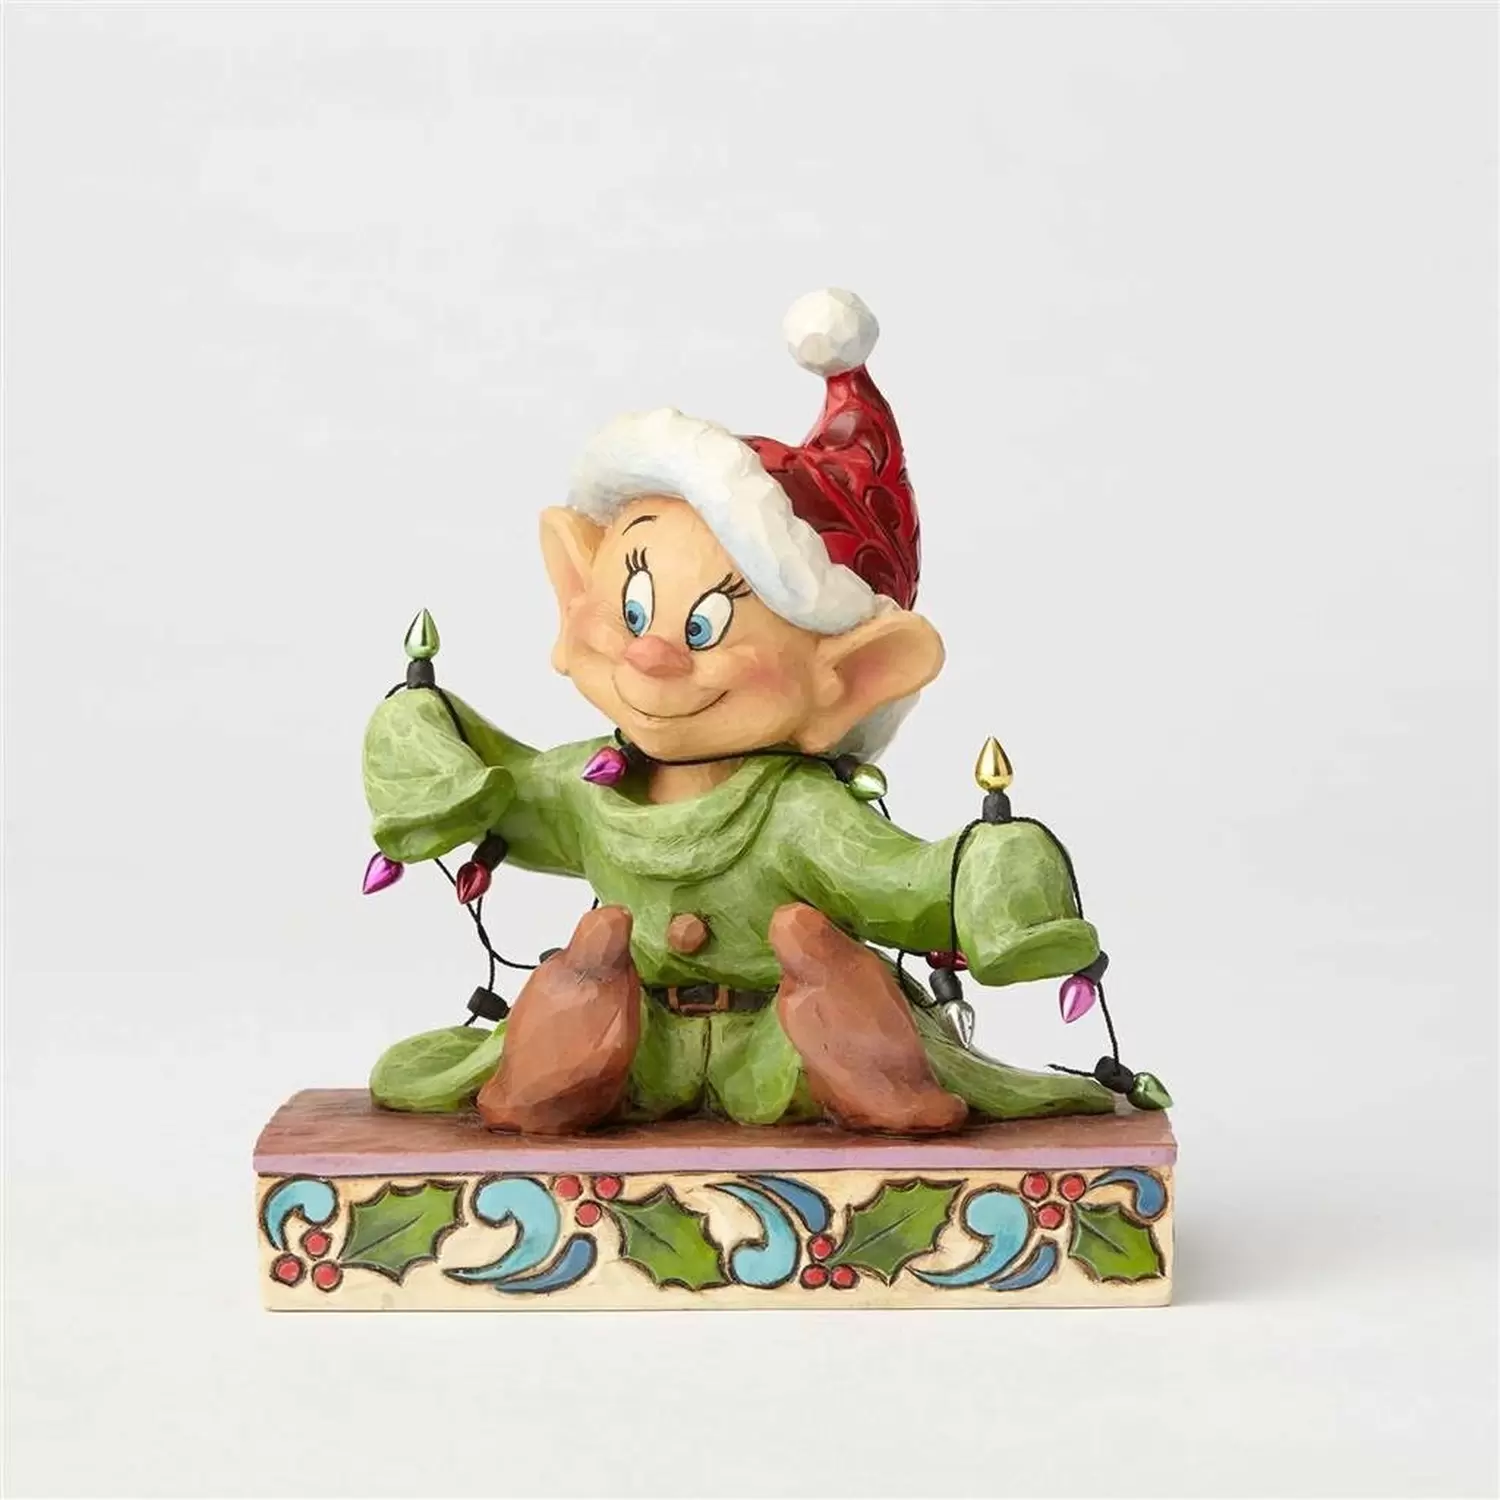 Disney Traditions by Jim Shore - Light Up The Holidays - Dopey with Christmas Lights